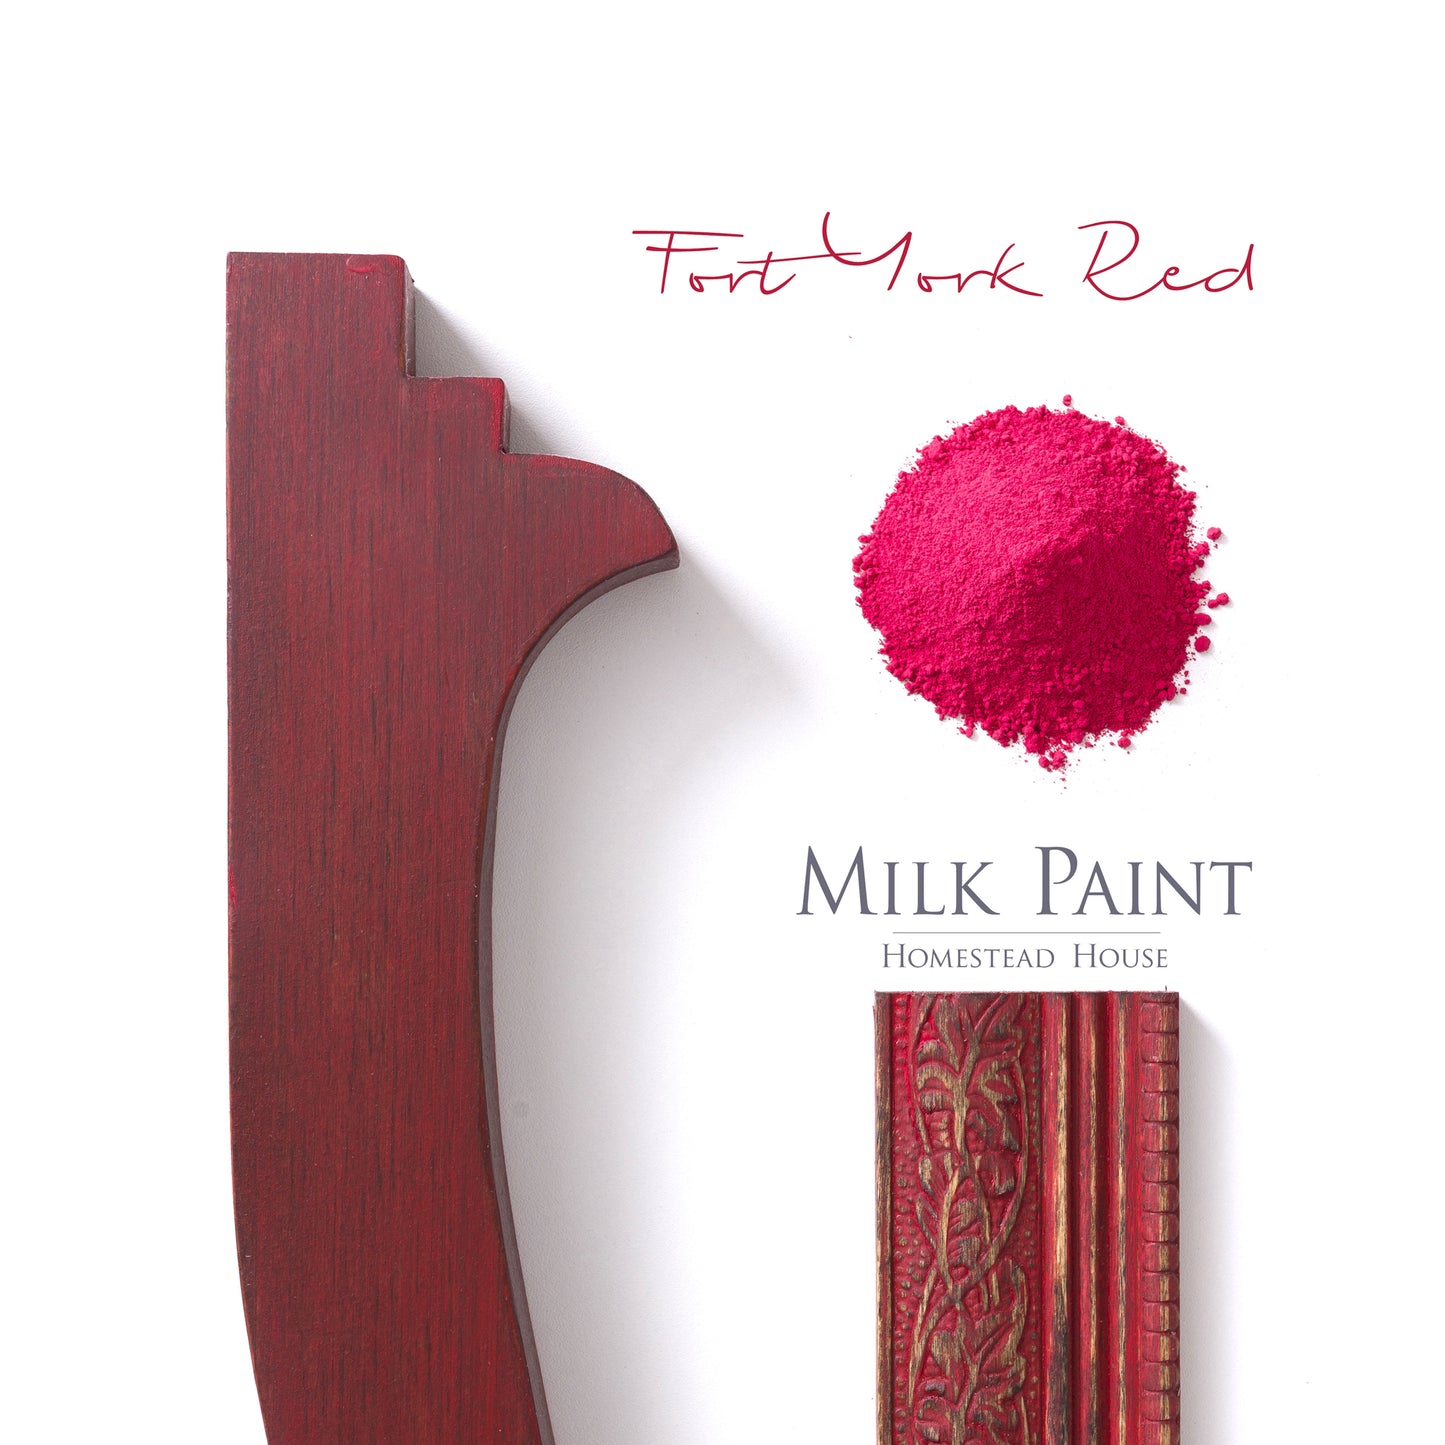 Milk Paint by Homestead House in Fort York Red -a bold yet cheerful bright red.   | homesteadhouse.ca